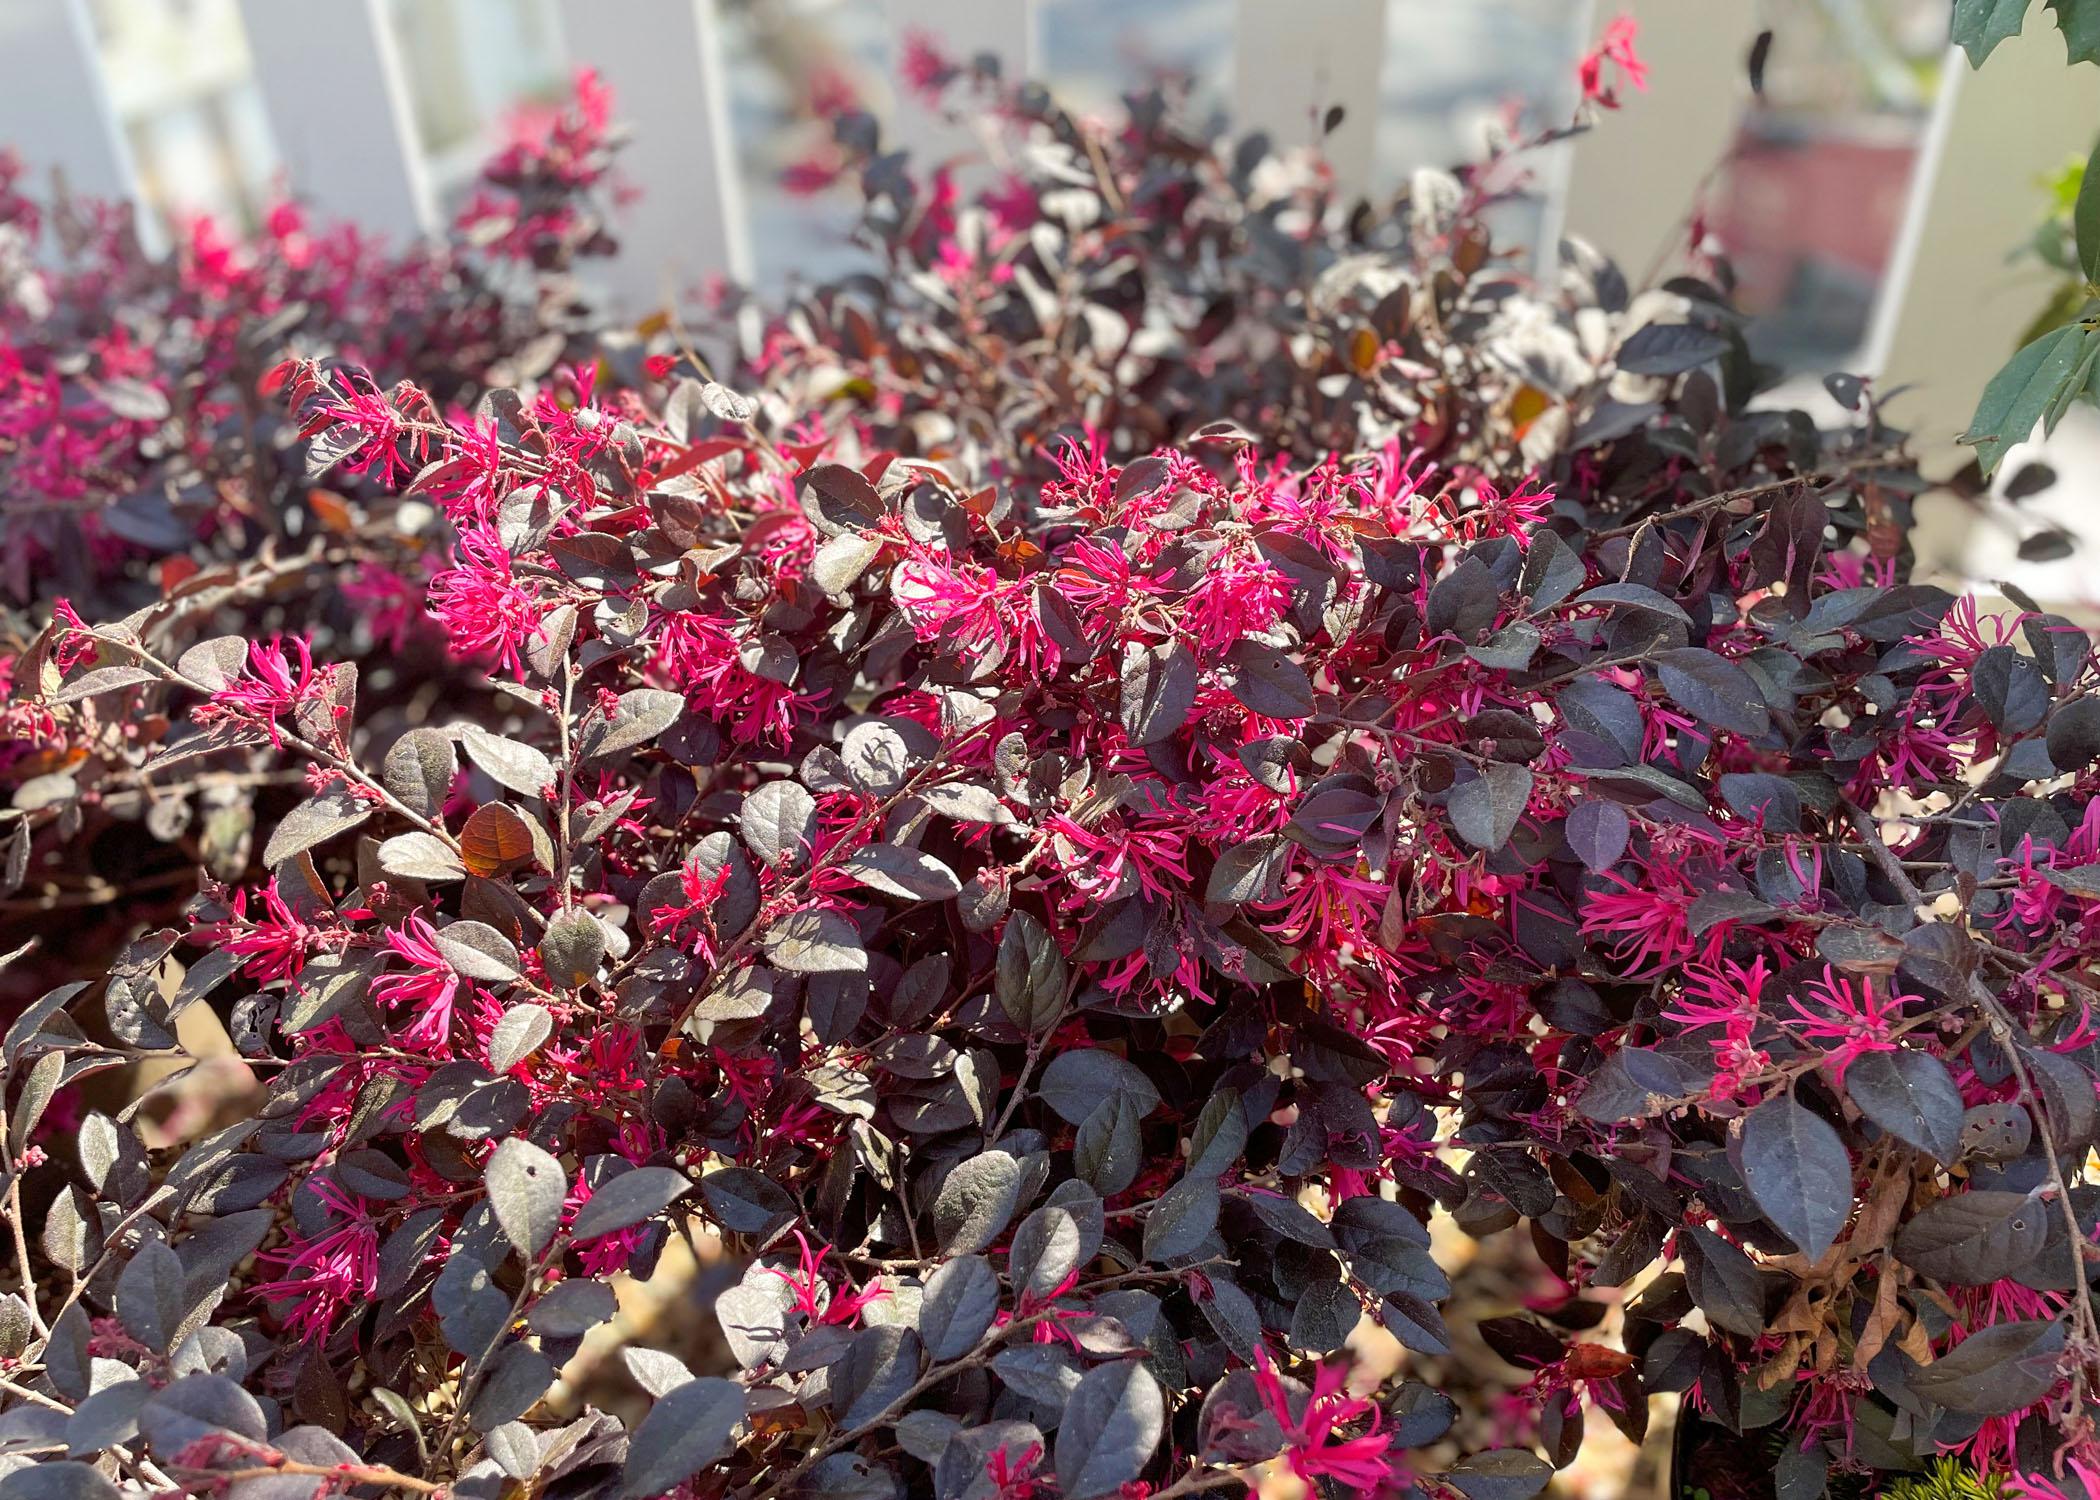 A dark shrub is covered in pink blooms.